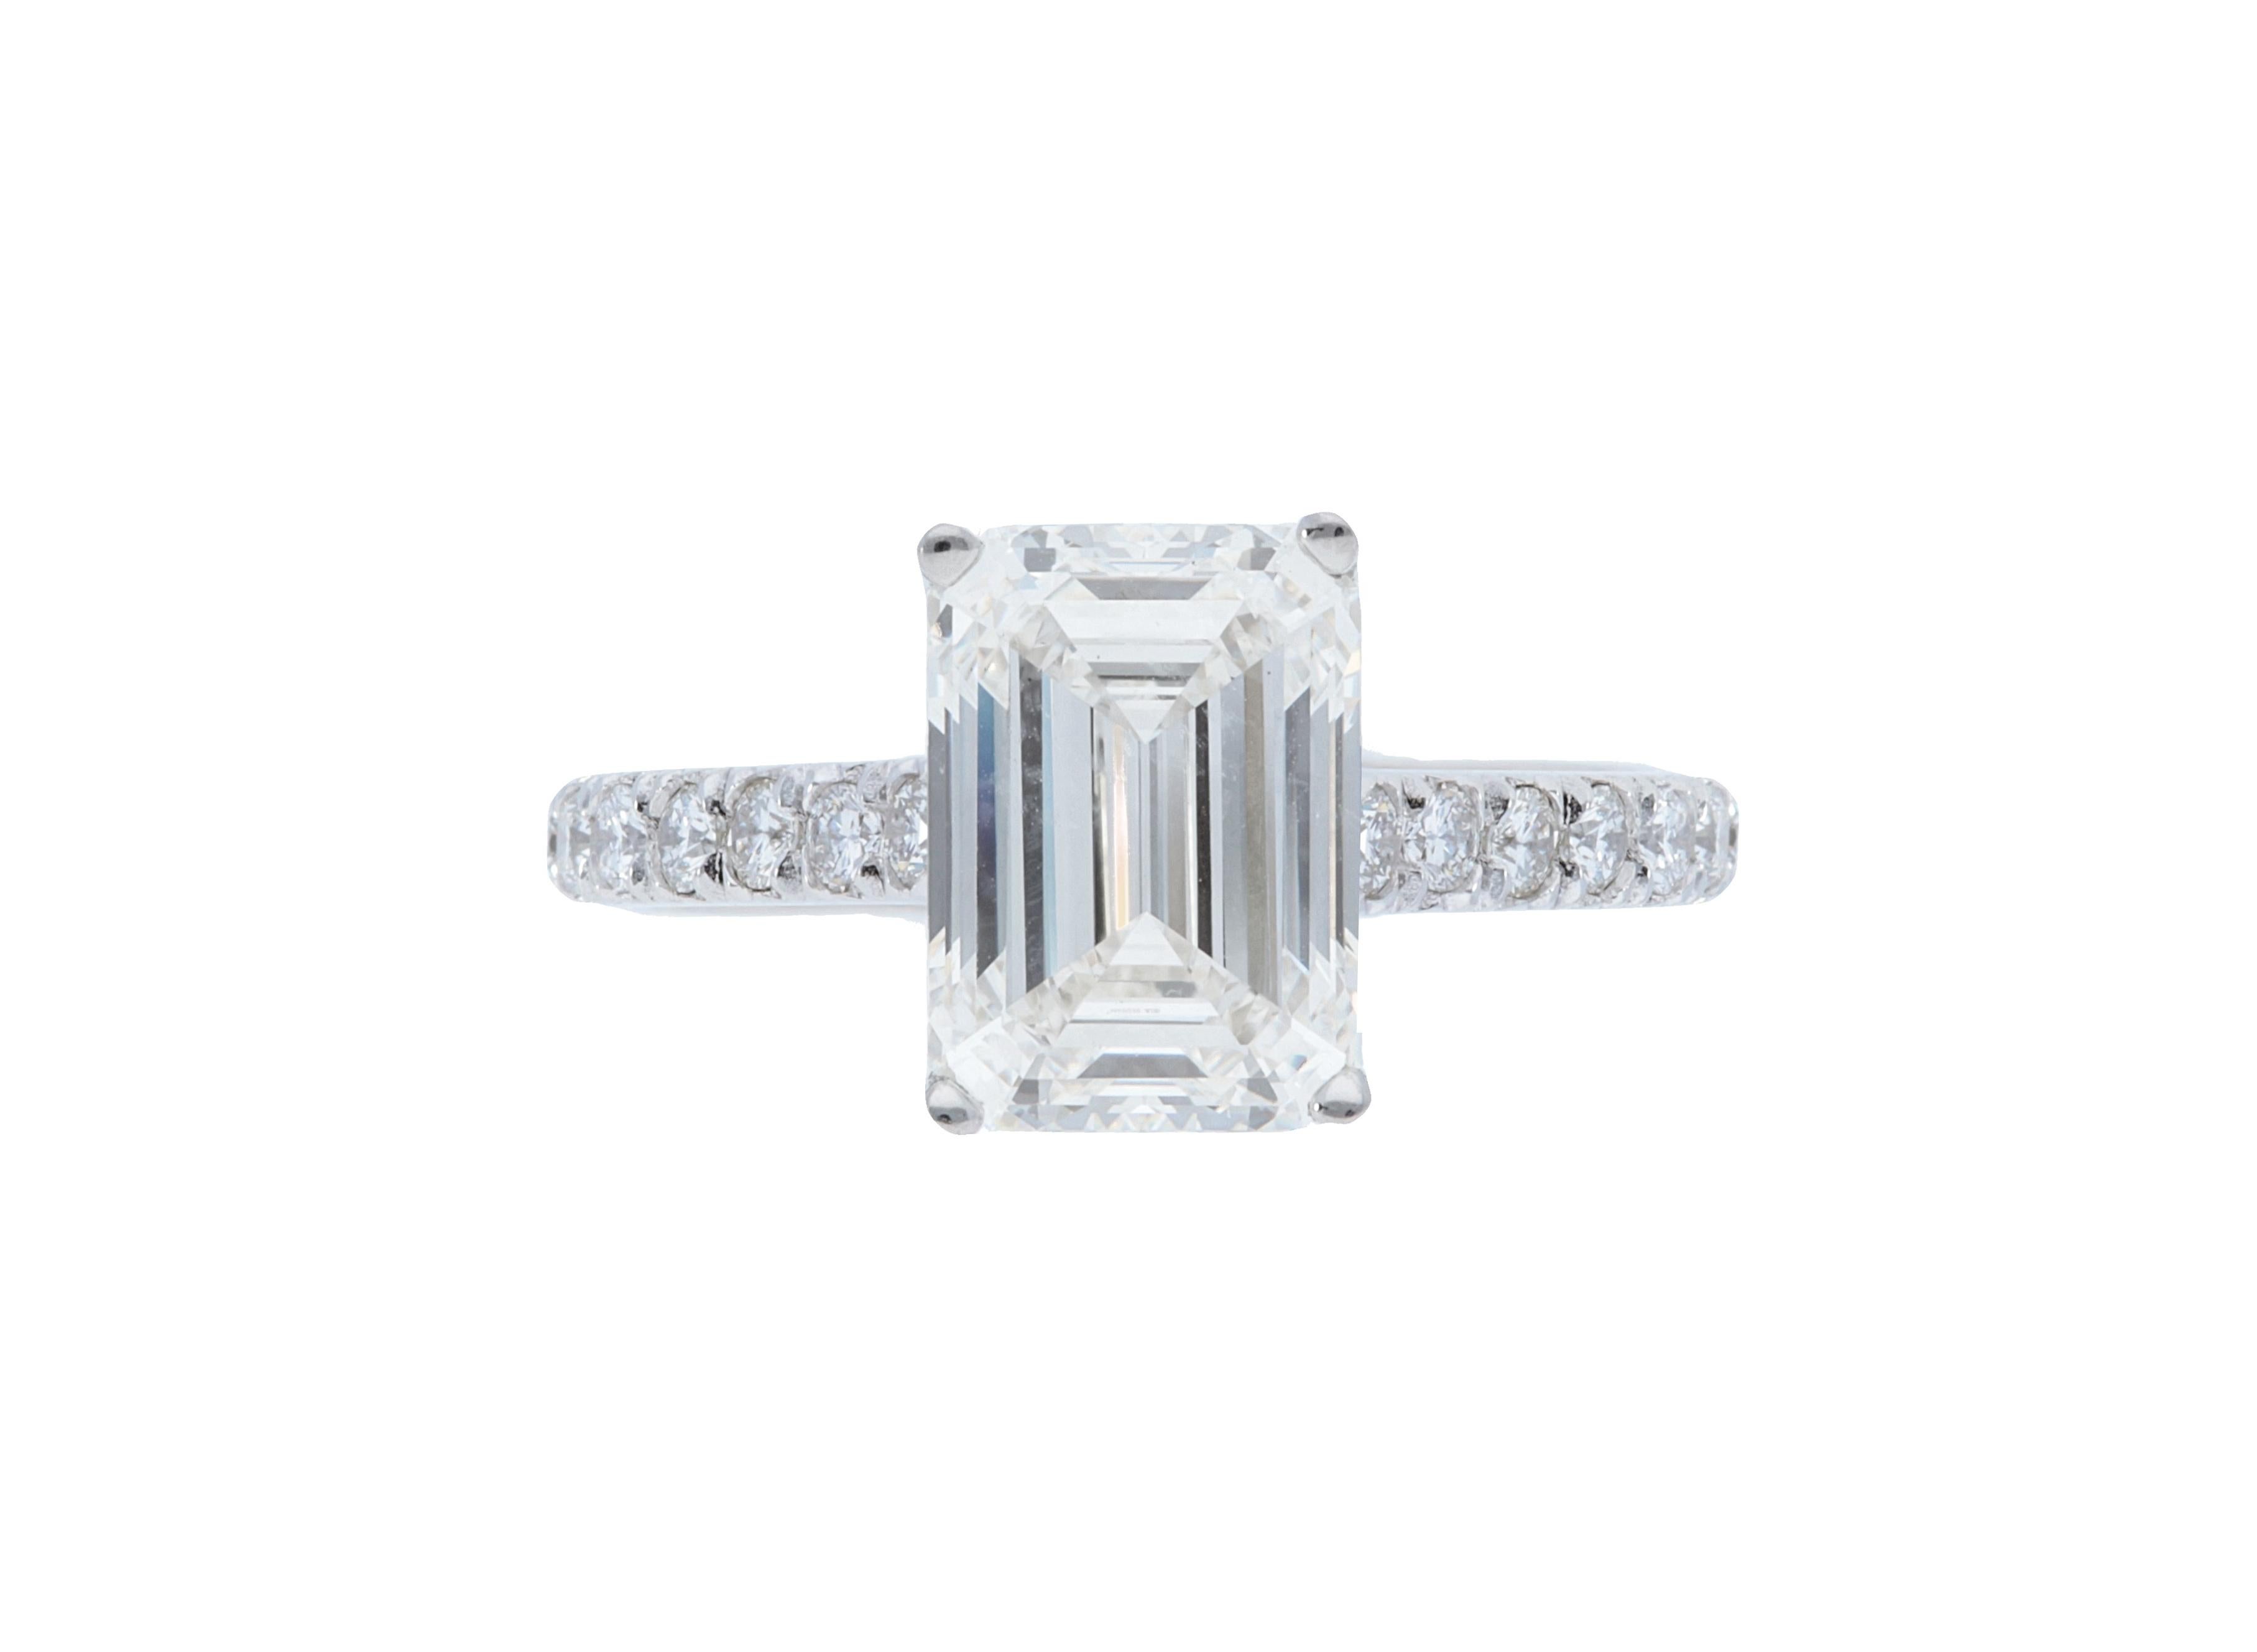 A Sofer Jewelry original piece. GIA certified 3.18 carat I SI1 emerald cut diamond set in platinum ring with 0.56 carats of white diamonds. Size 5.5.